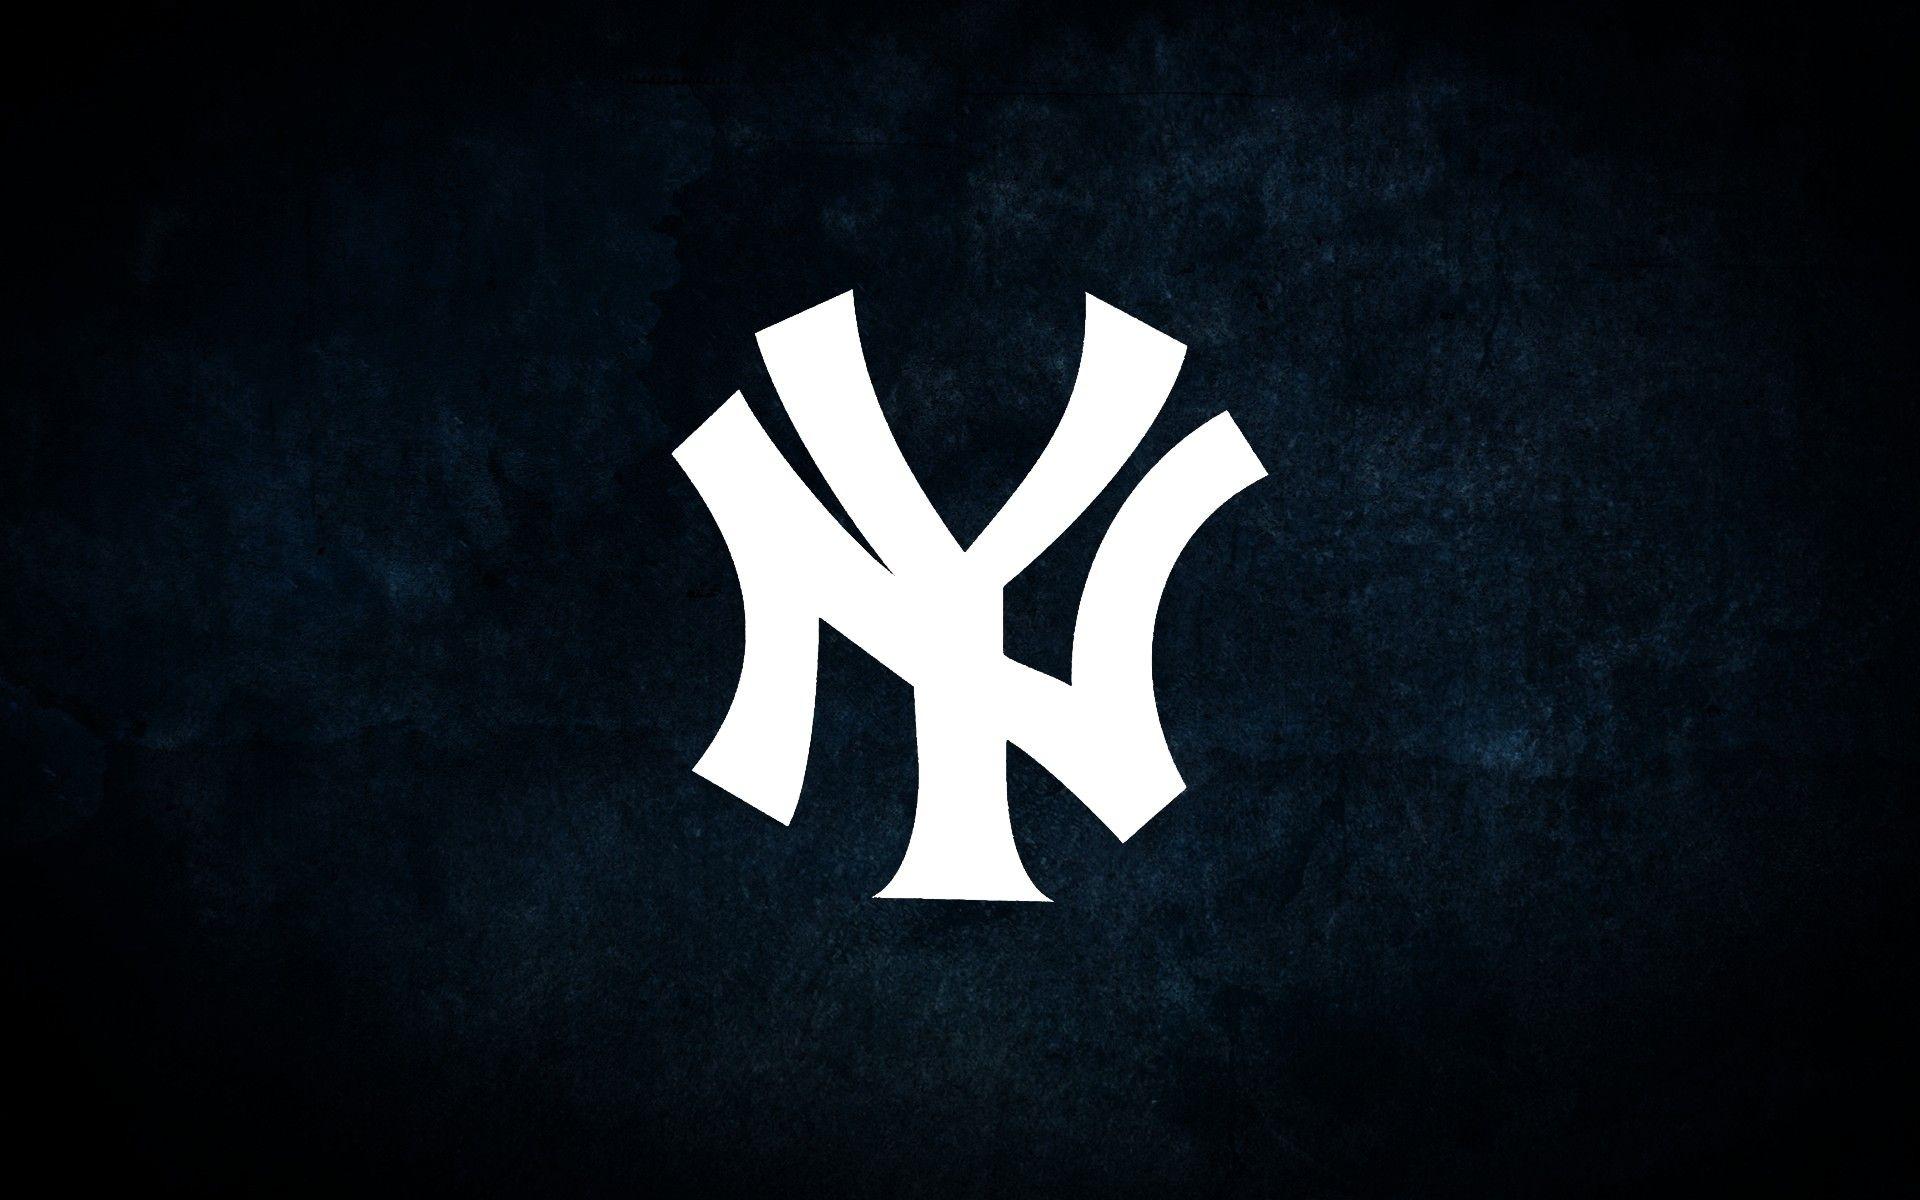 Stay reppin' with these wallpapers 👊 - New York Yankees